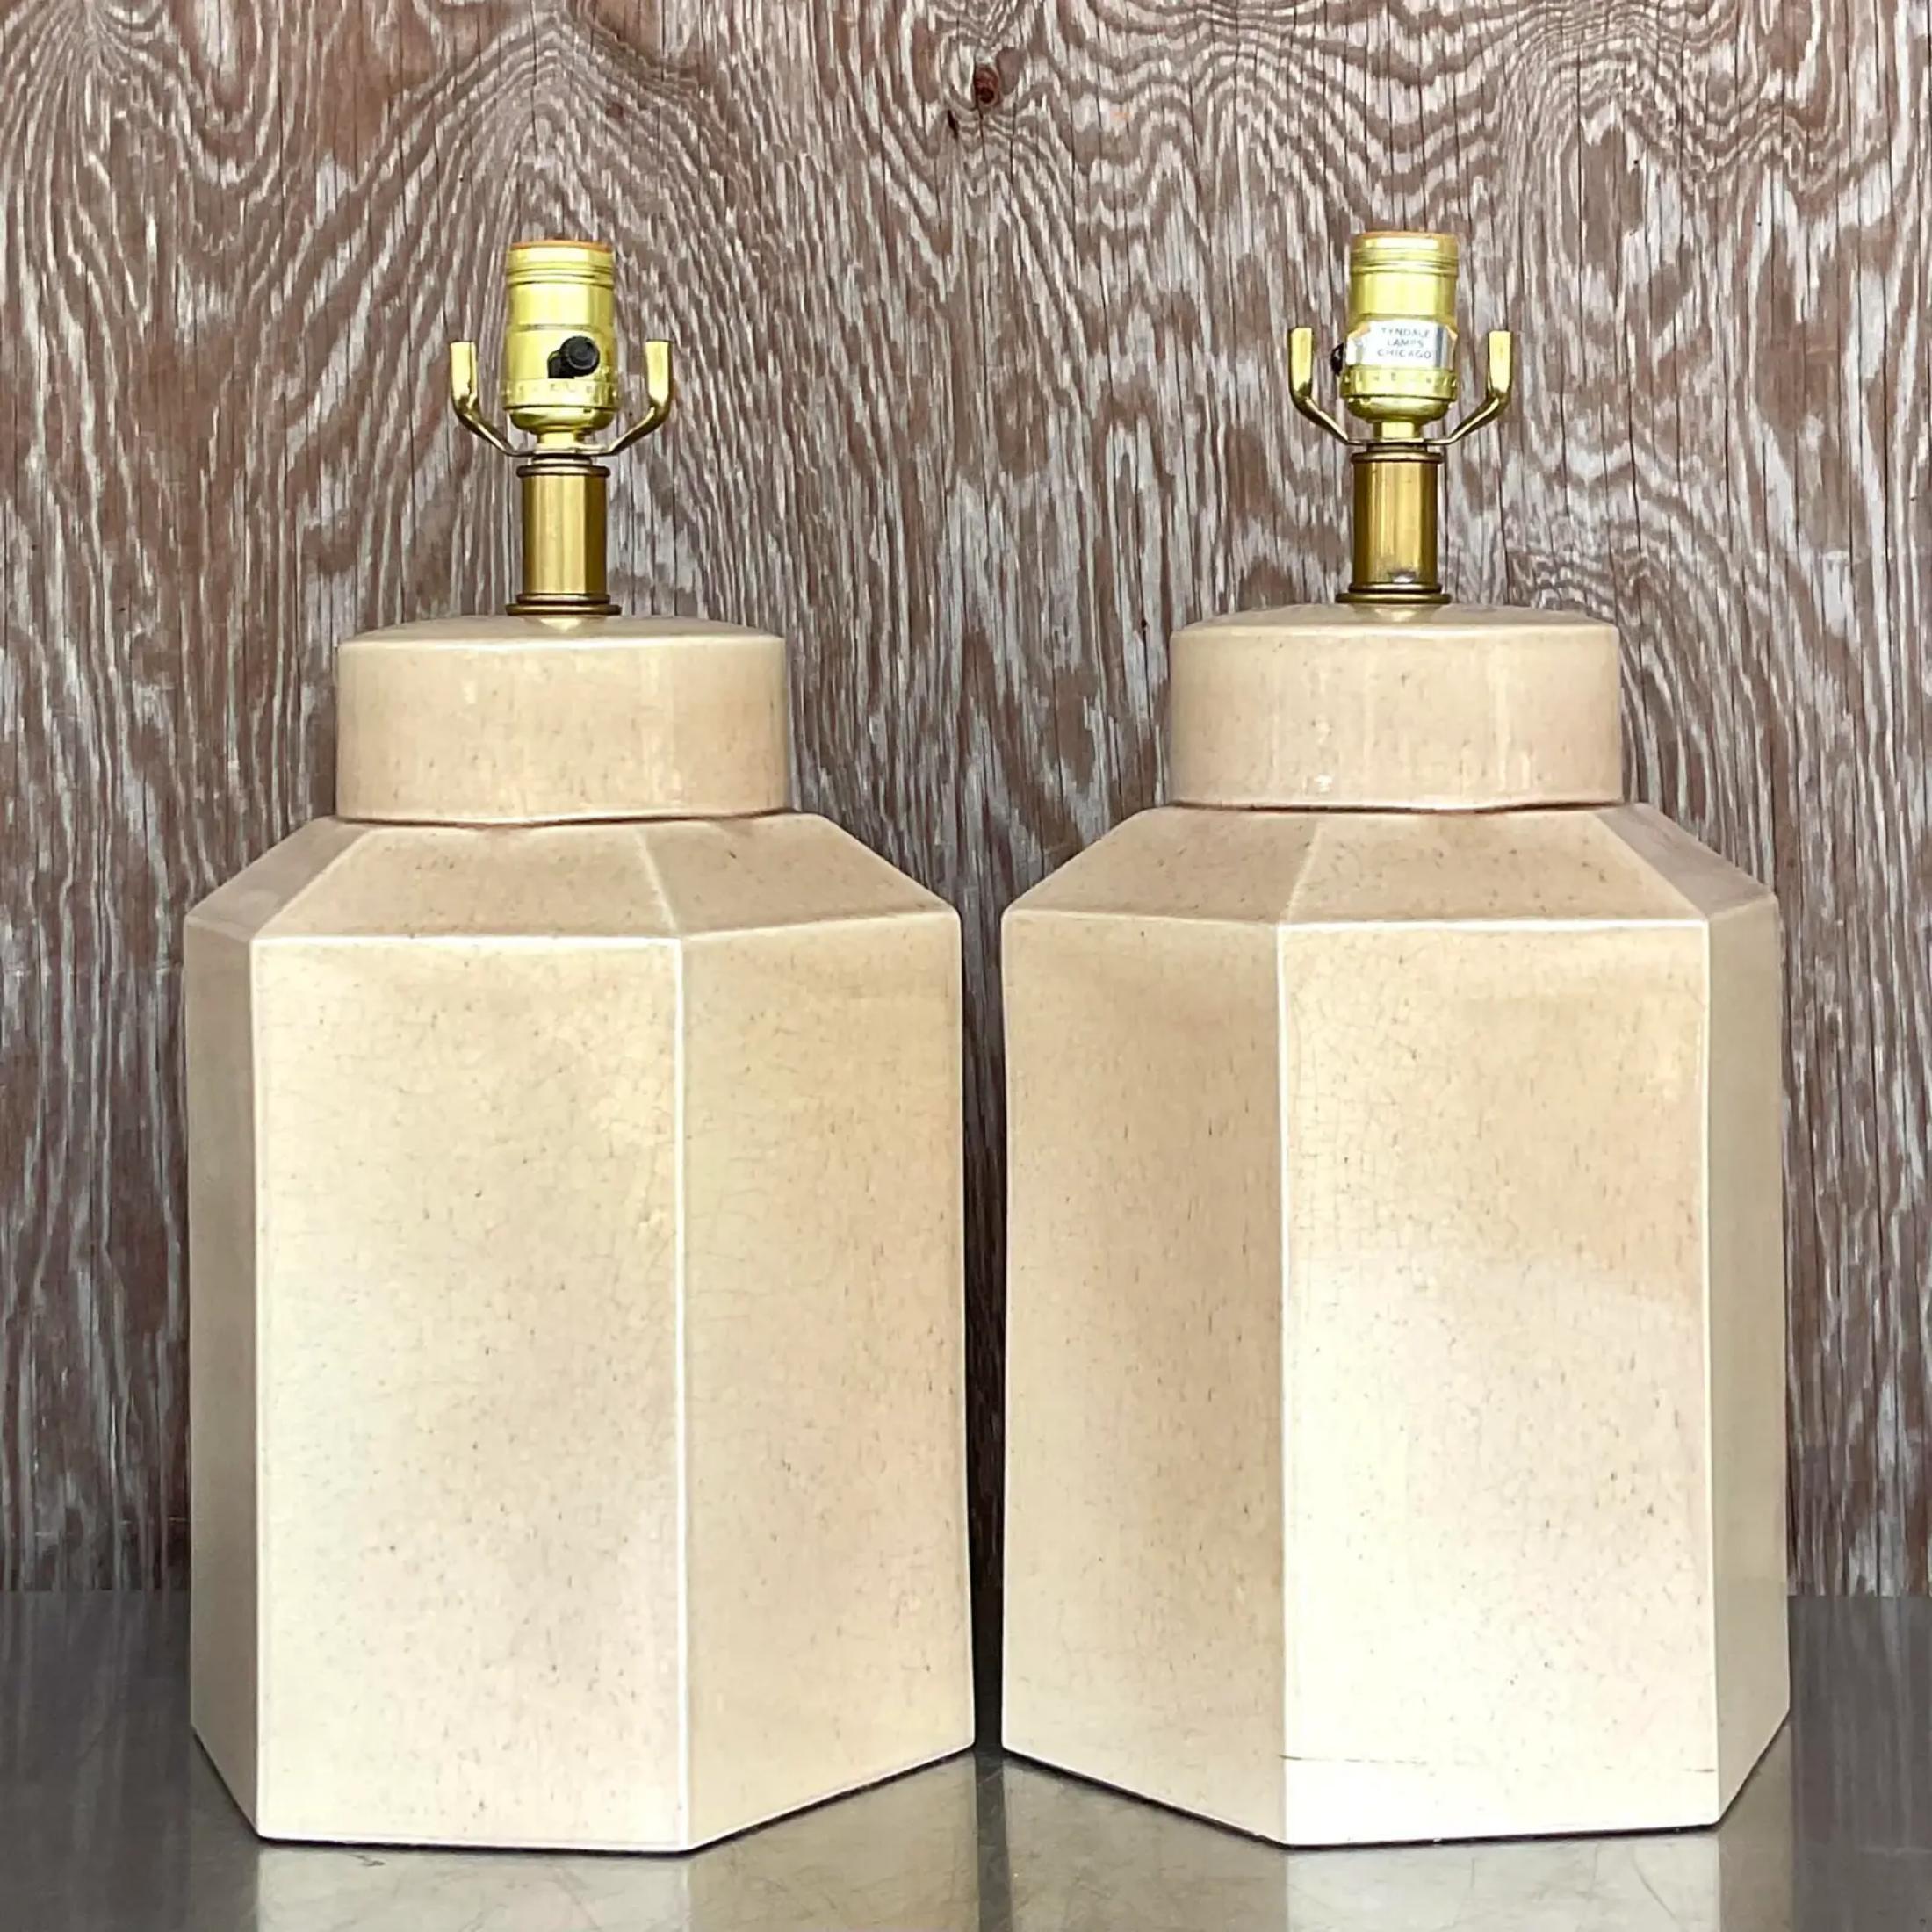 A fabulous pair of vintage Boho table lamps. A chic neutral color in a glazed ceramic finish. Acquired from a Palm Beach estate